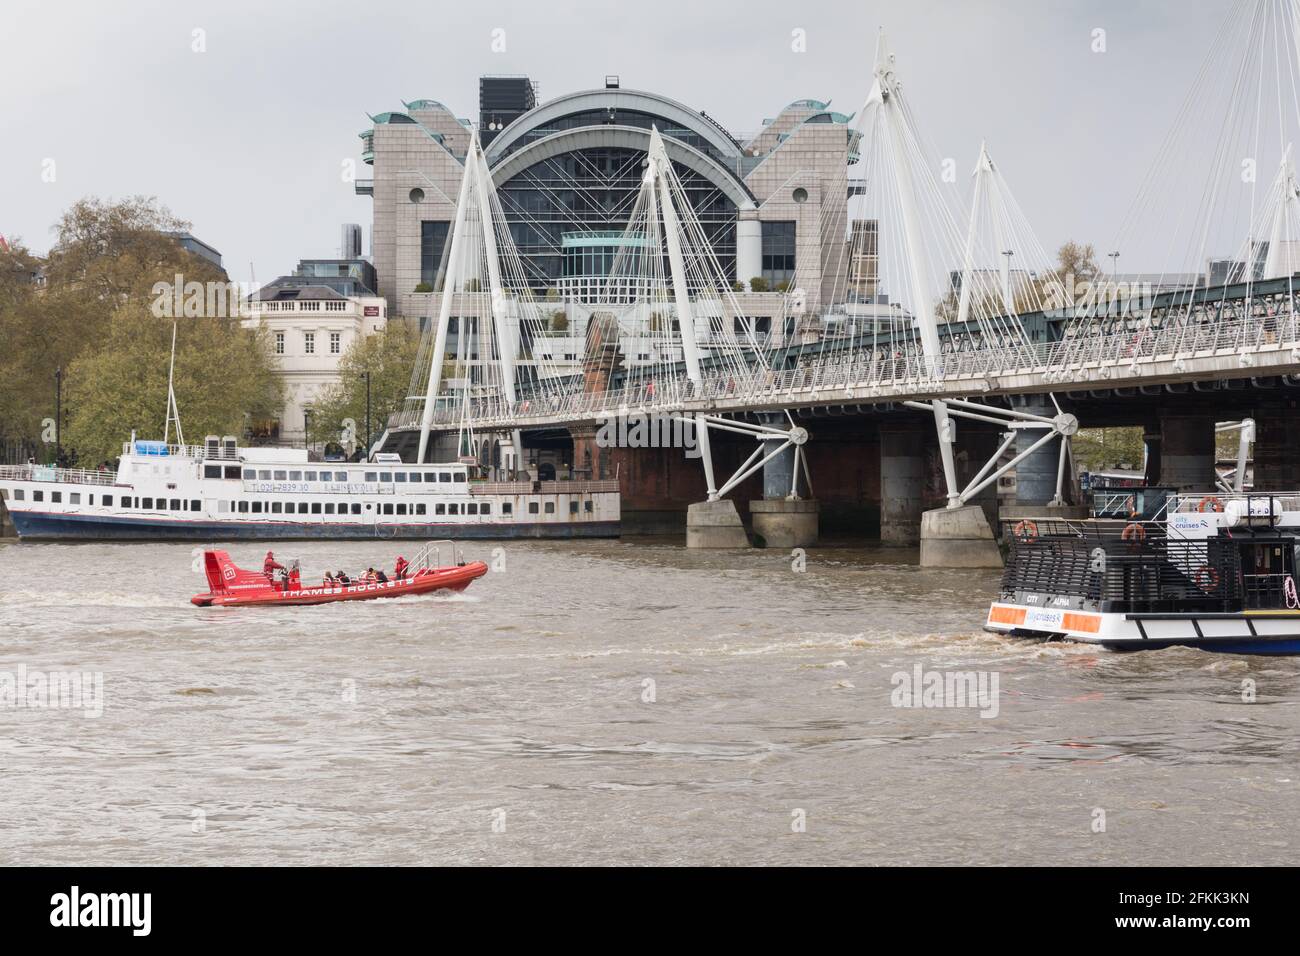 A Thames Rocket rib boat passes near Charing Cross Station and the Golden Jubilee Footbridge and Hungerford Bridge, Waterloo, London, England, UK Stock Photo